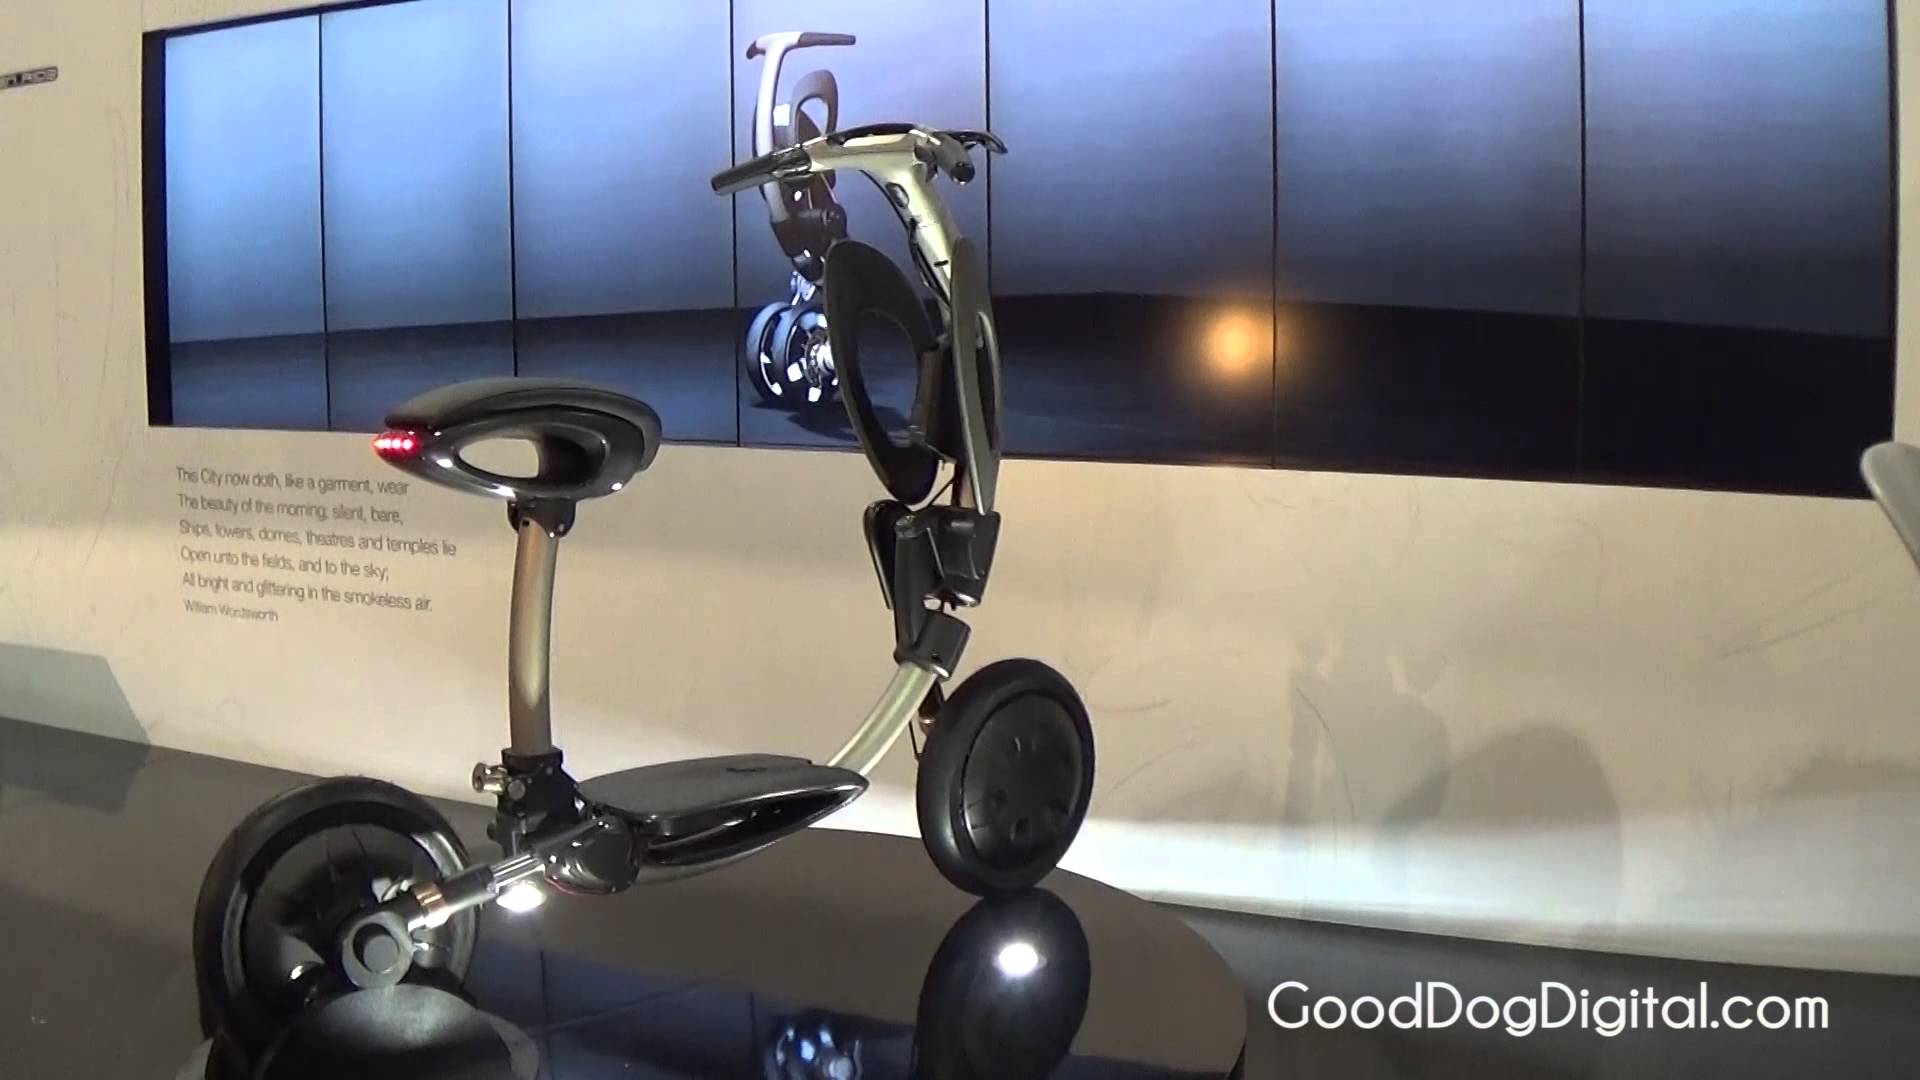 Green Ride - INU Personal Urban Transportation Vehicle - CES 2015 ...